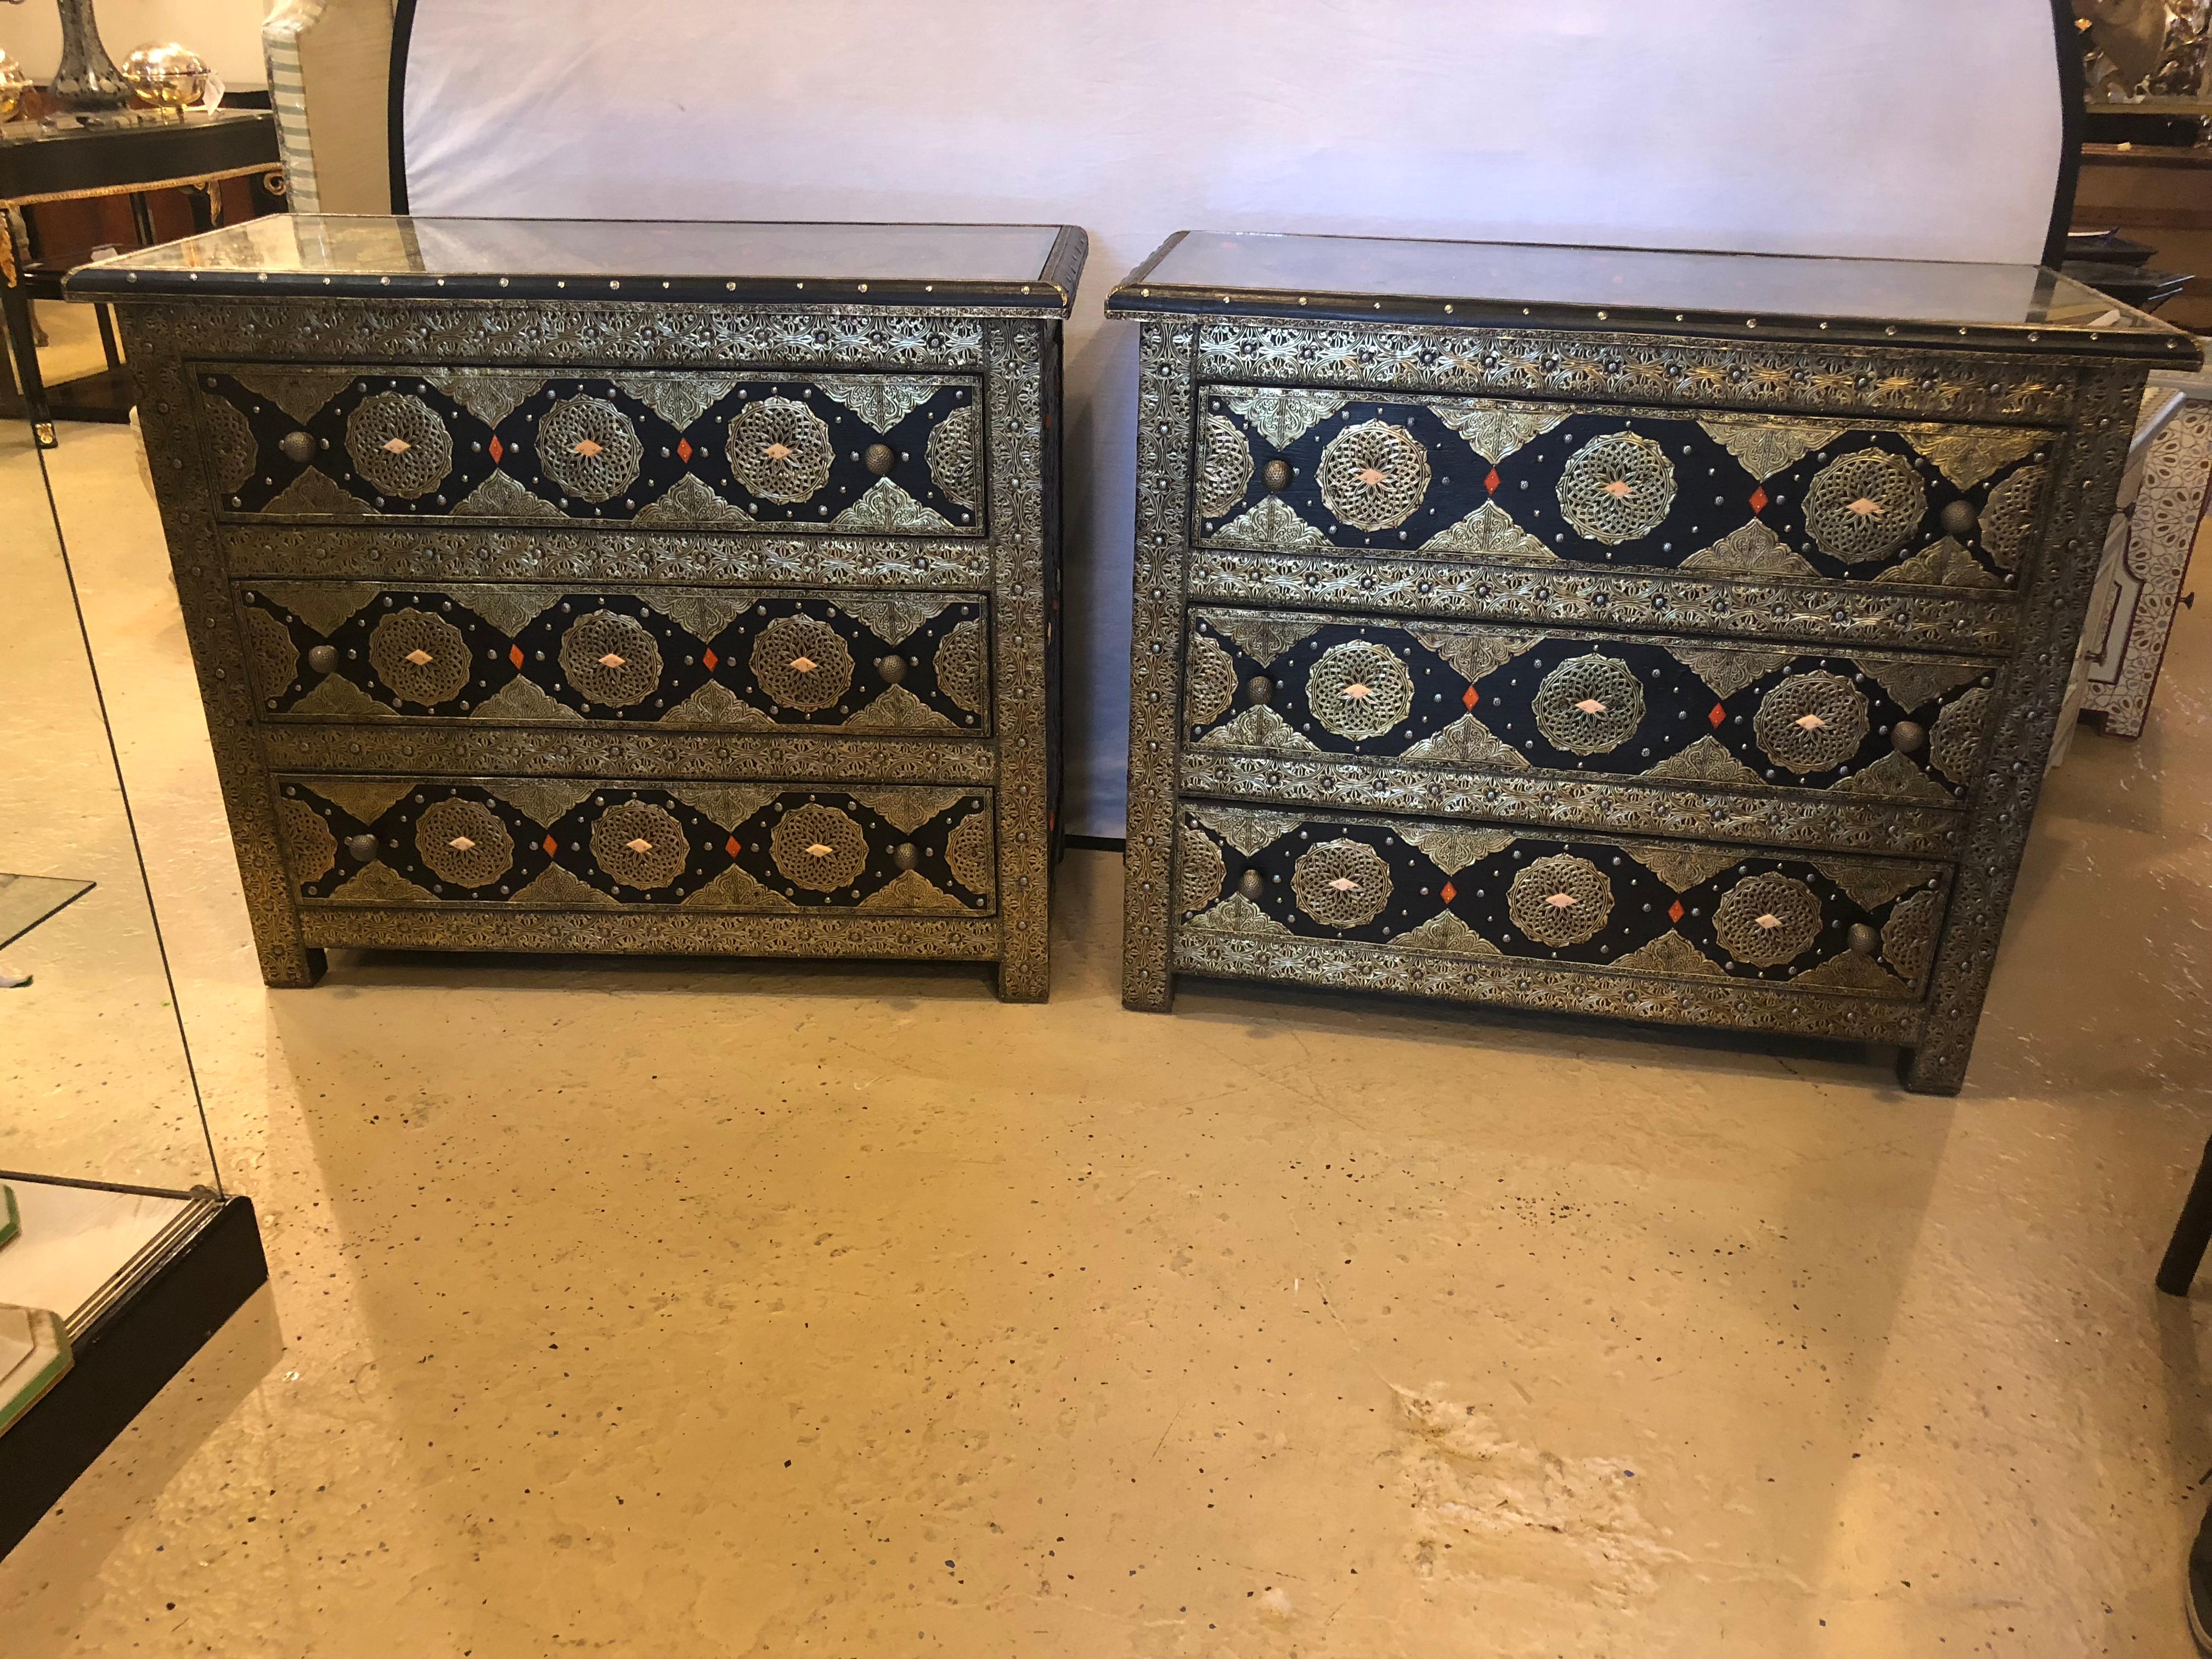 Pair of brass and ebony camel bone inlaid Moroccan commode or nightstands. These exceptional chests depict and compliment the Hollywood Regency era at its finest. Each featuring amazing intricate latticework on silver-toned metal and brass and